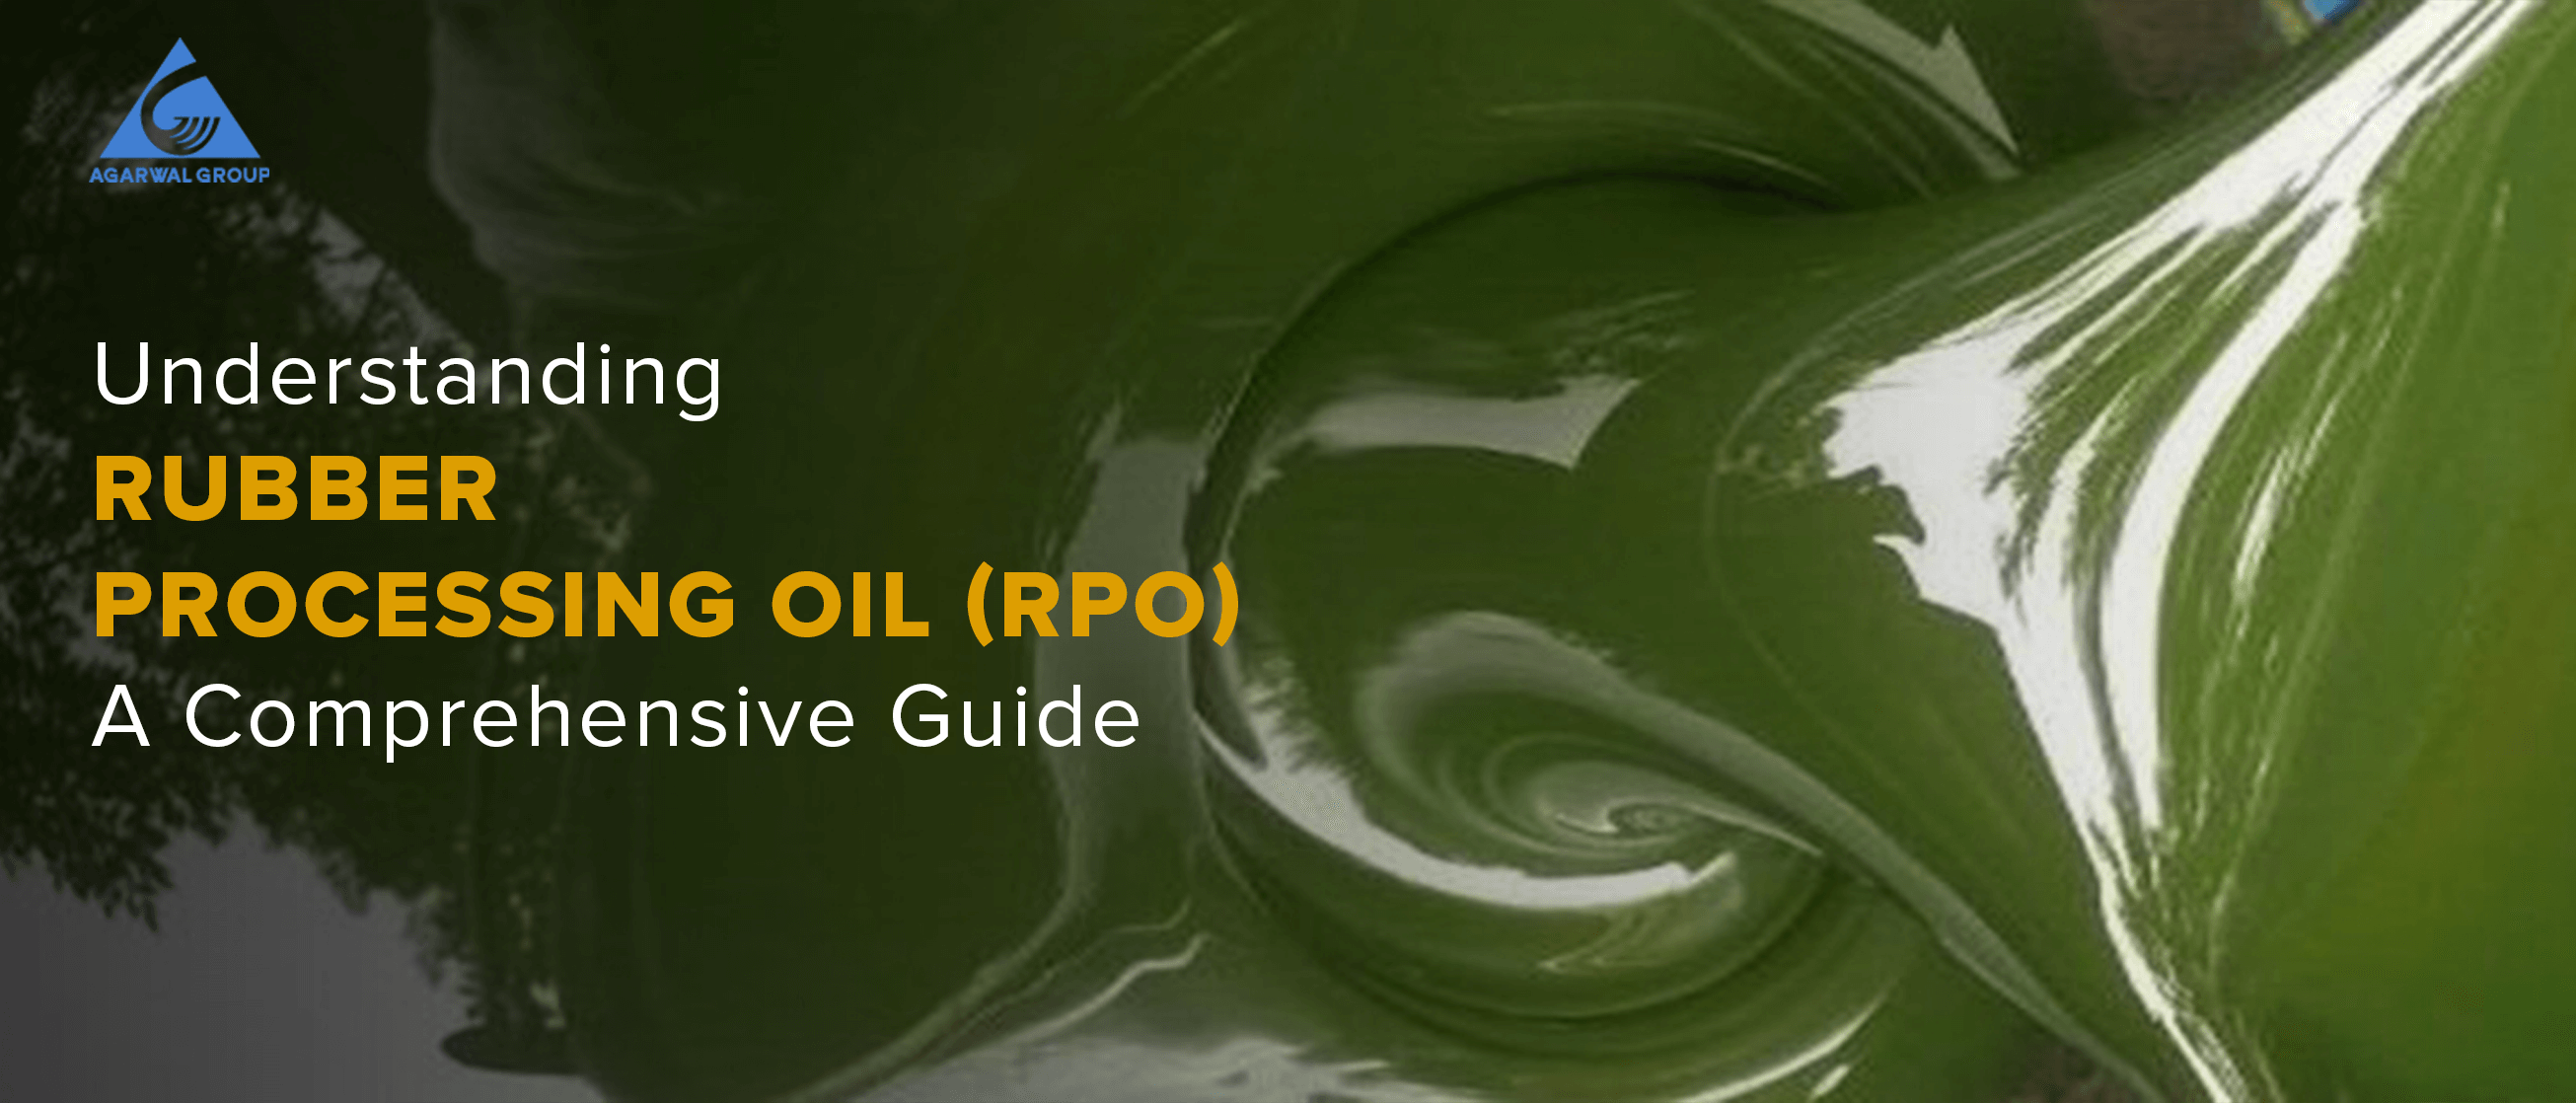 Understanding Rubber Processing Oil (RPO): A Comprehensive Guide